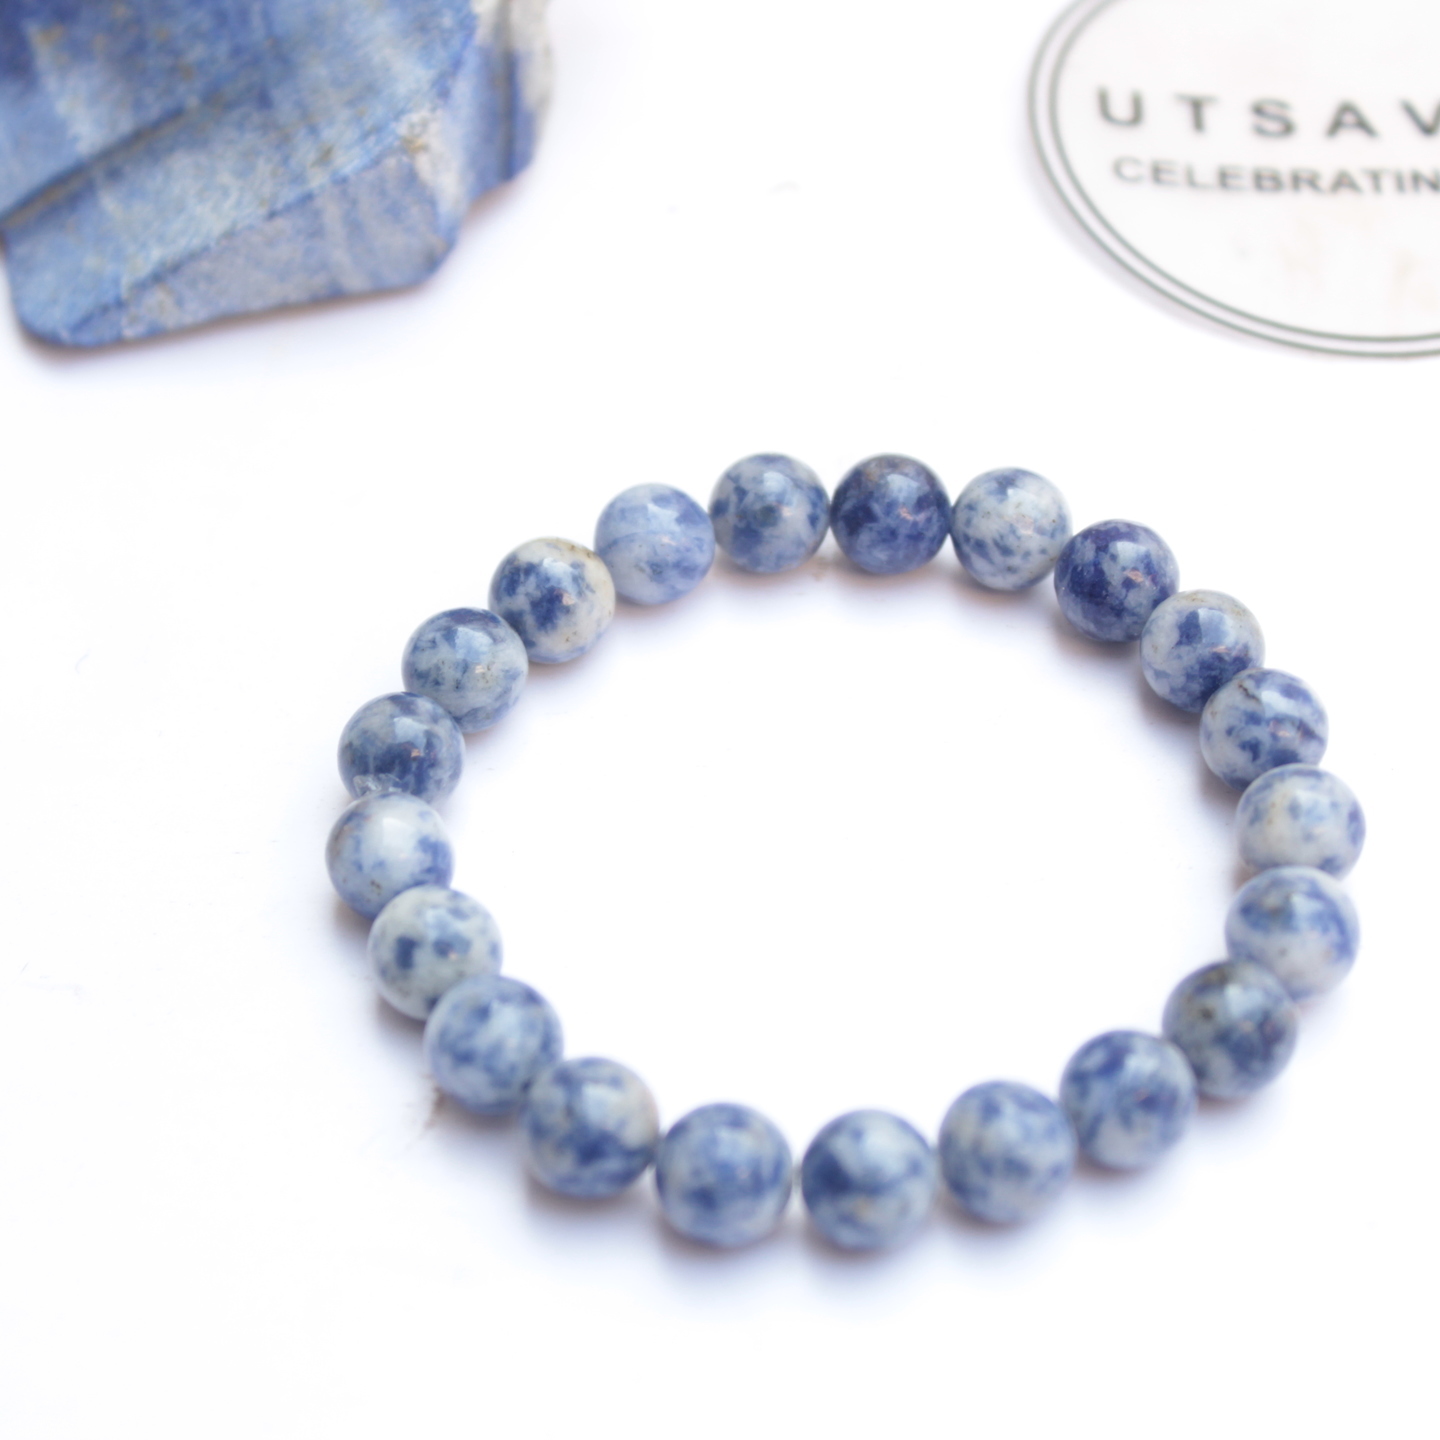 For Peace and Stress relief - Sodalite Bracelet UTSAVAA